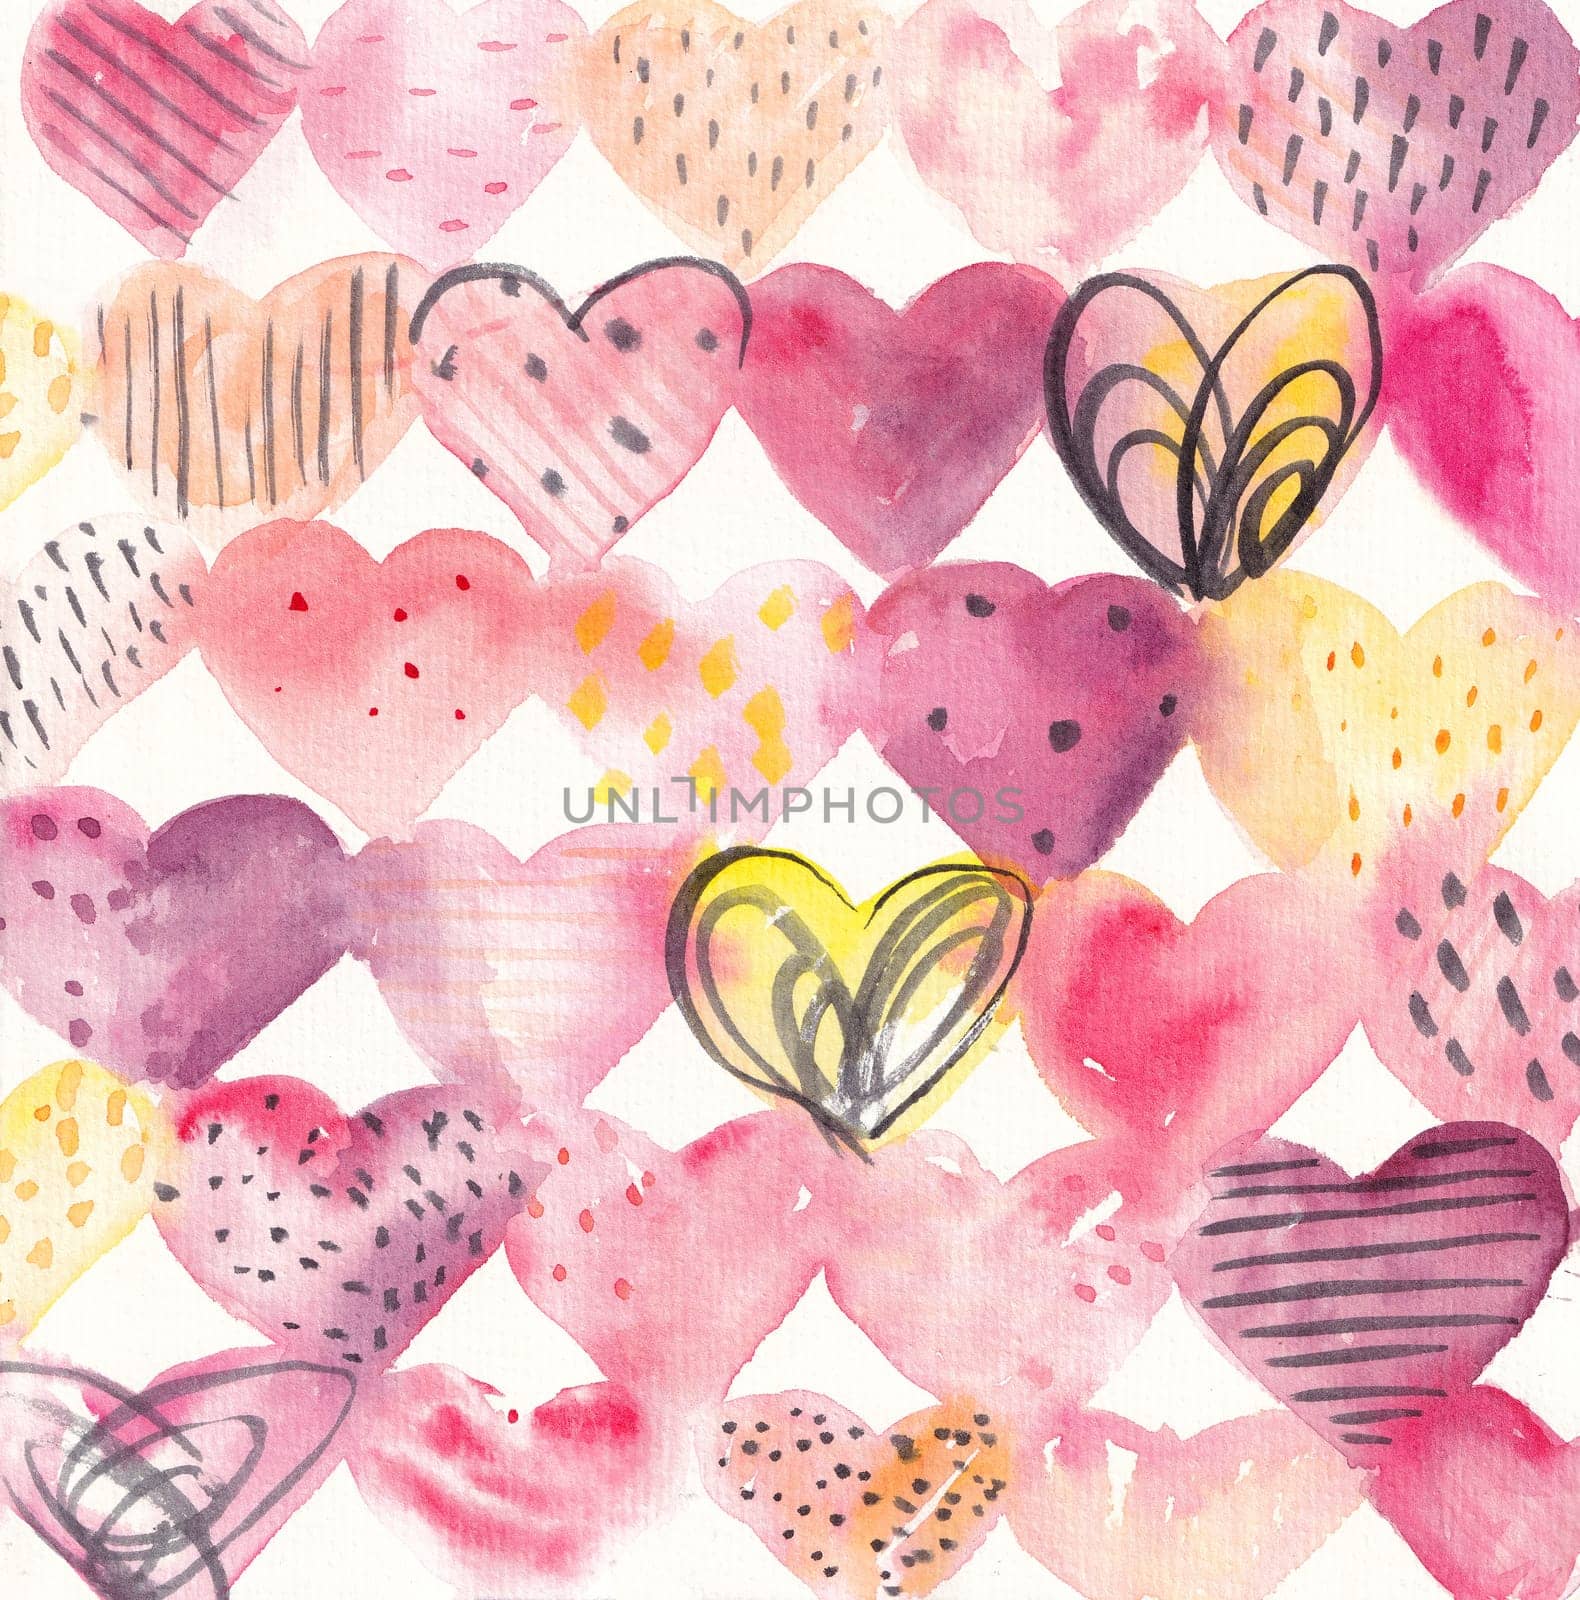 Watercolor hearts background. Pink watercolor heart pattern. Colorful watercolor romantic texture. Watercolor hand drawn illustration